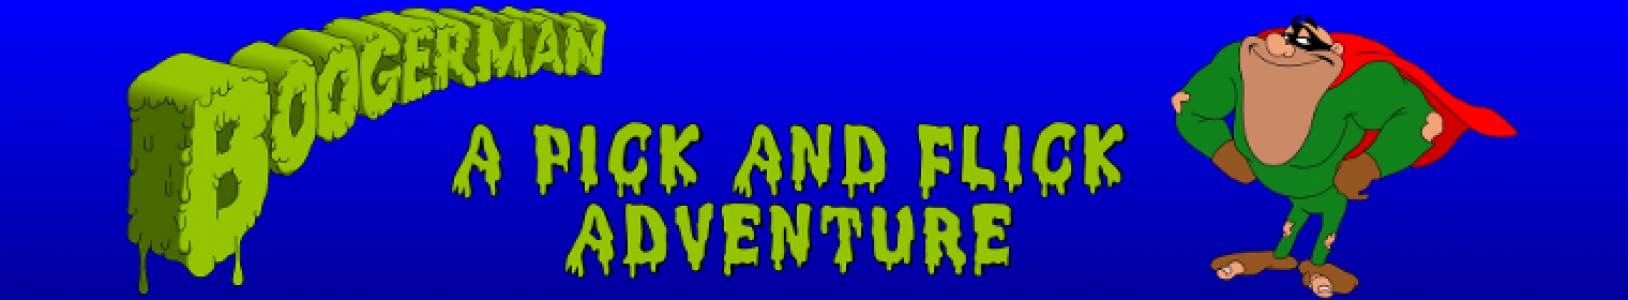 Boogerman: A Pick and Flick Adventure banner